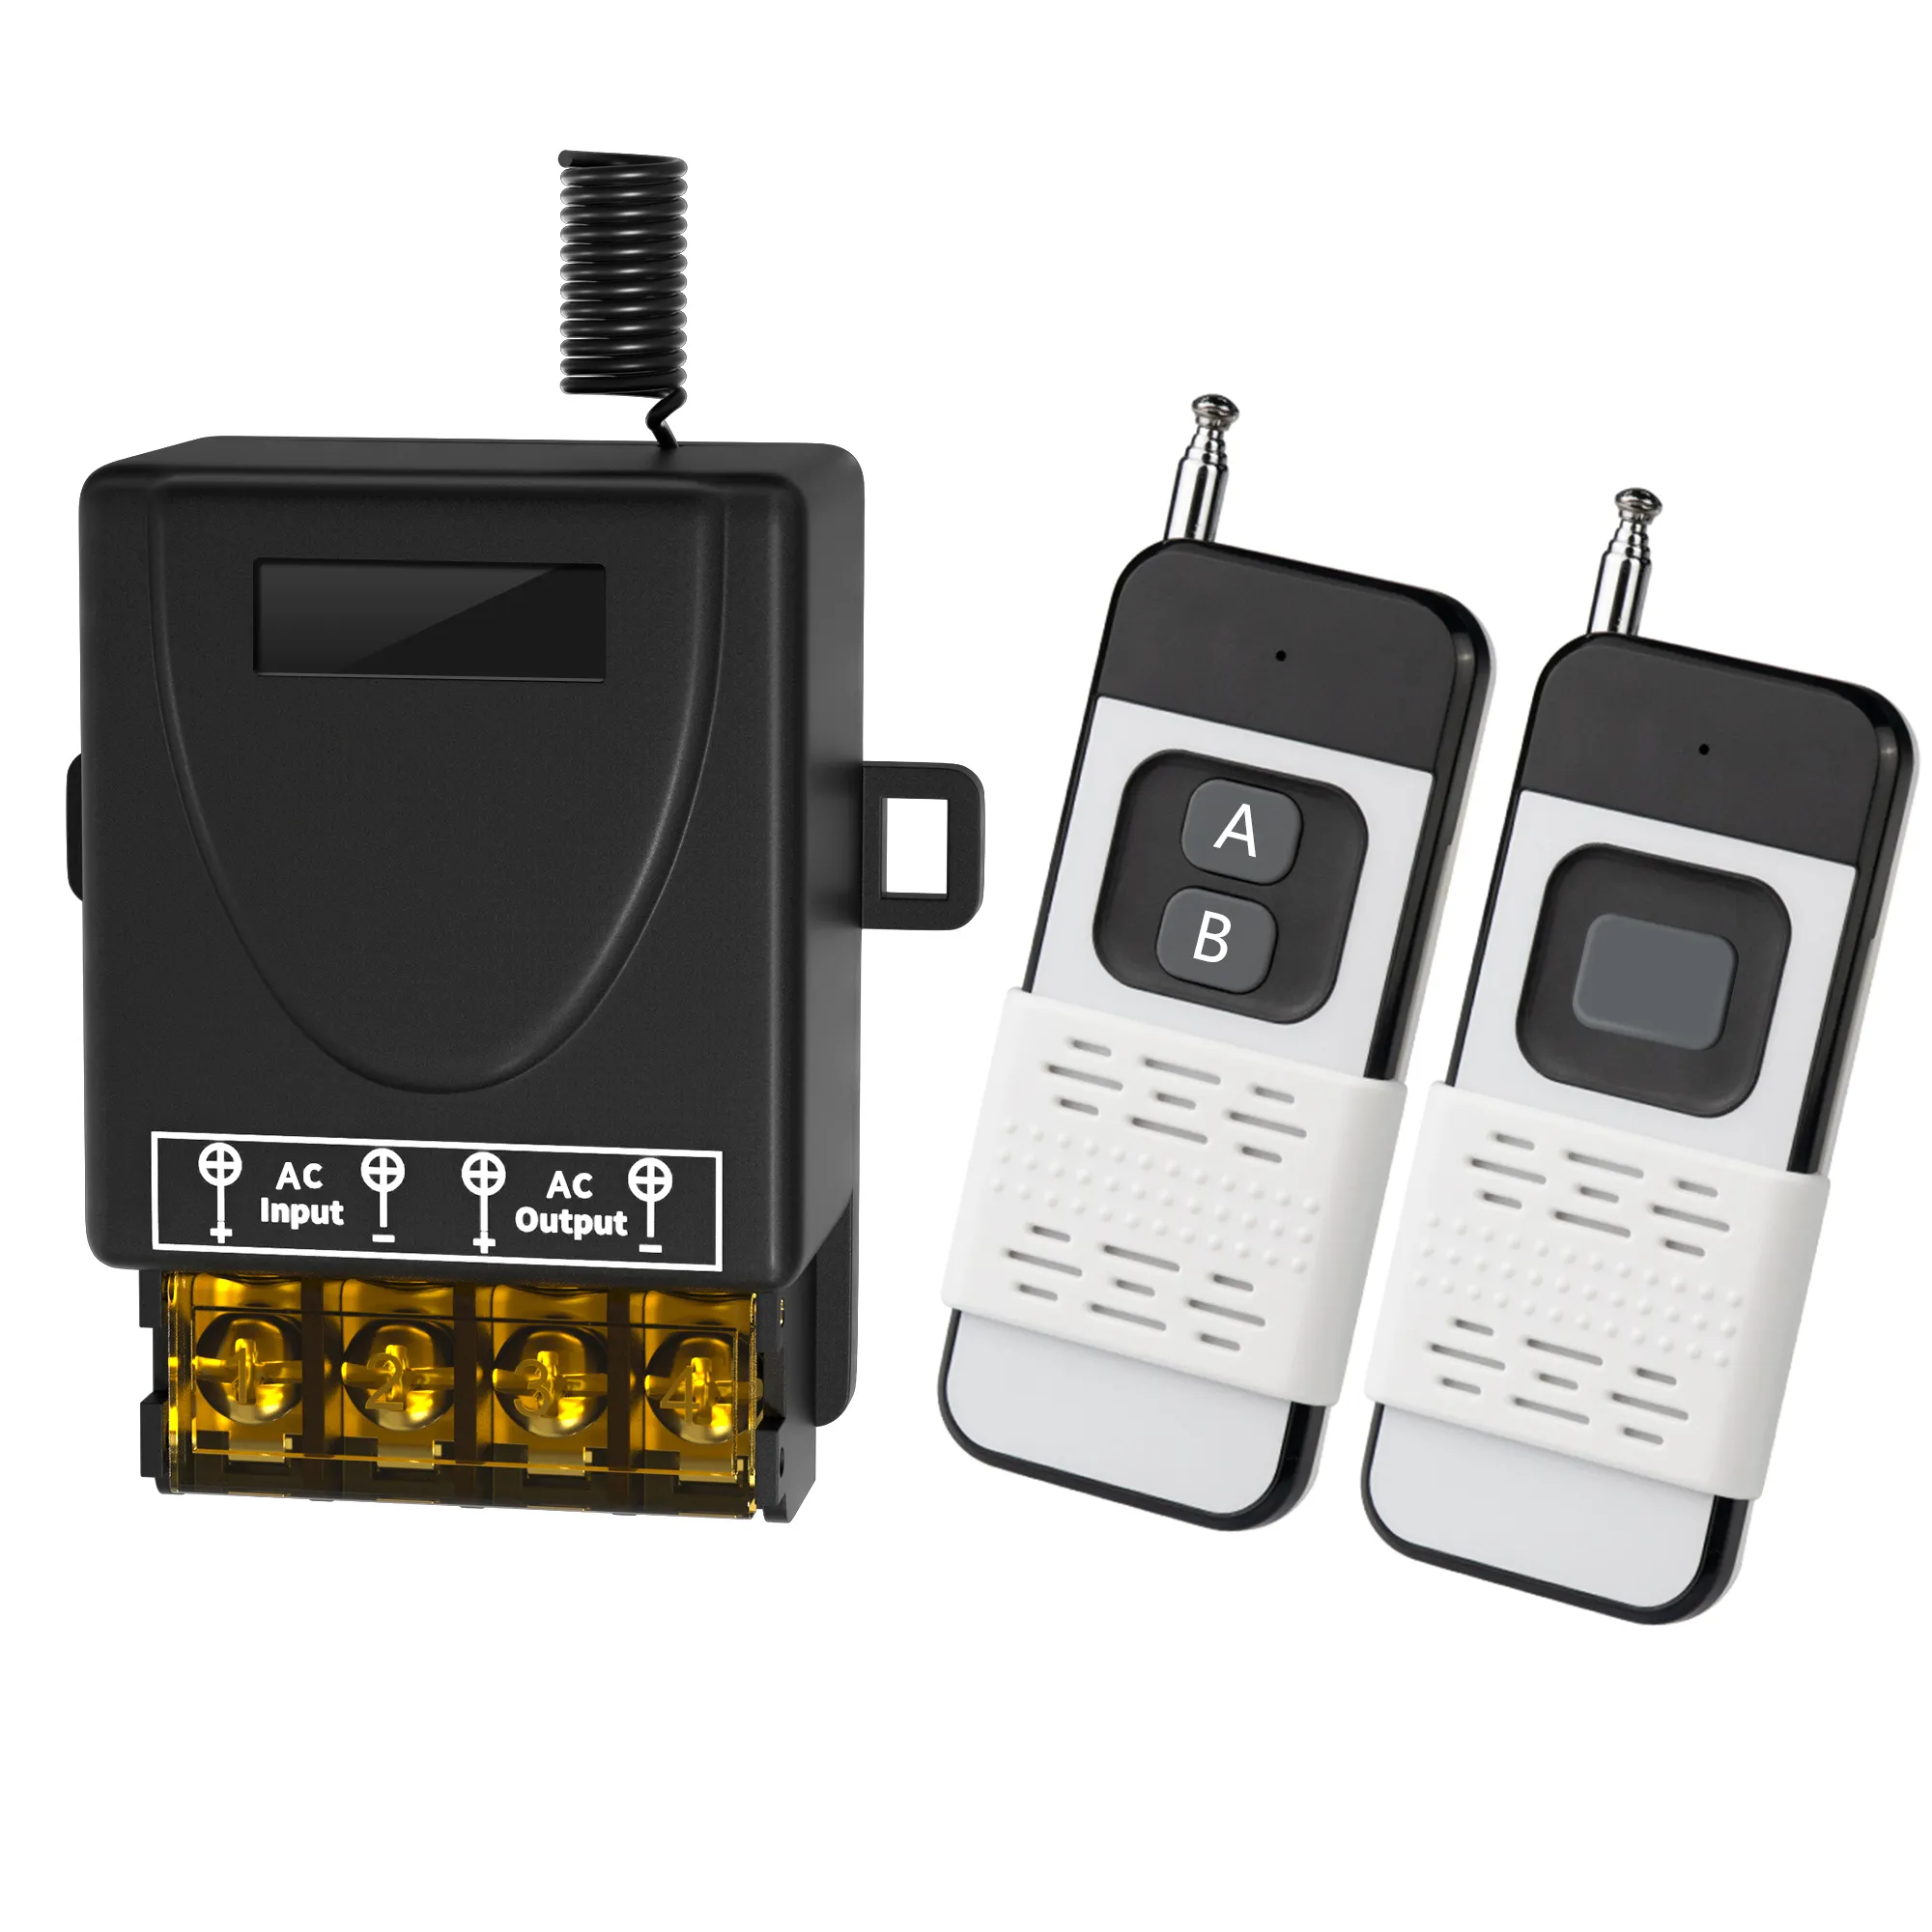 AC220V 30A Hign Power relay Wireless RF Remote Control Switch 1 Transmitter + 1 Receiver 433 MHz Remote controller